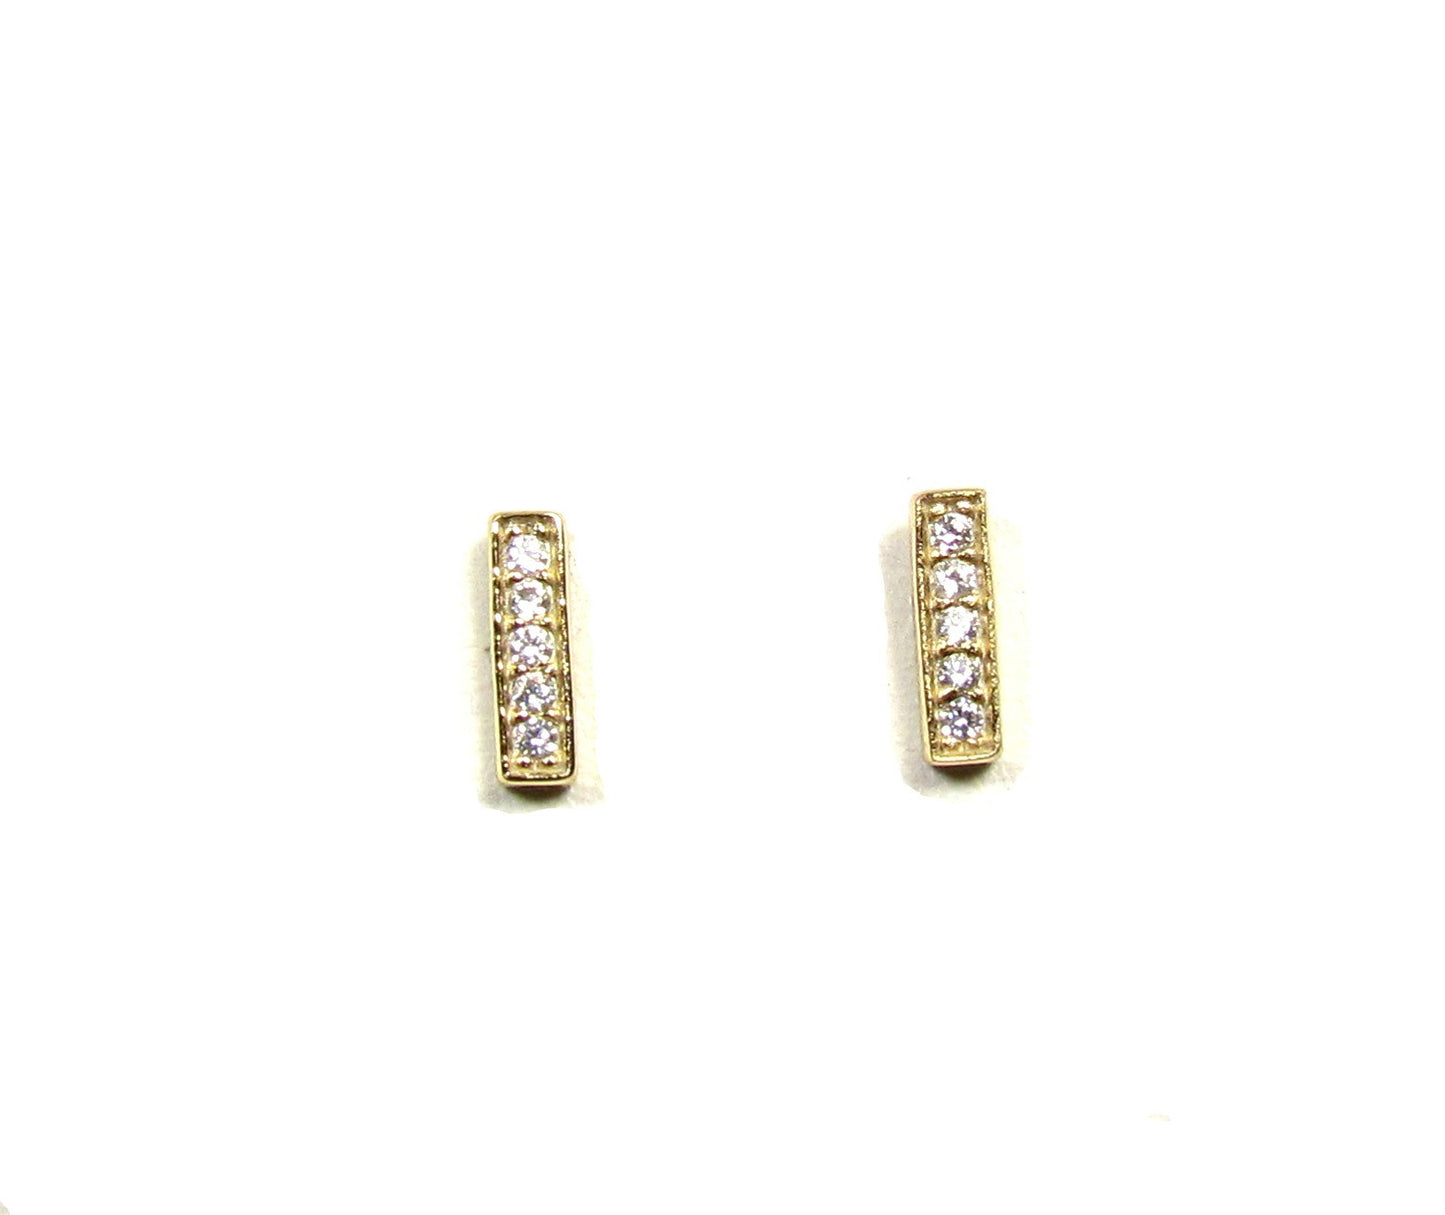 Tiny Bar Earrings with Cubic Zirconia